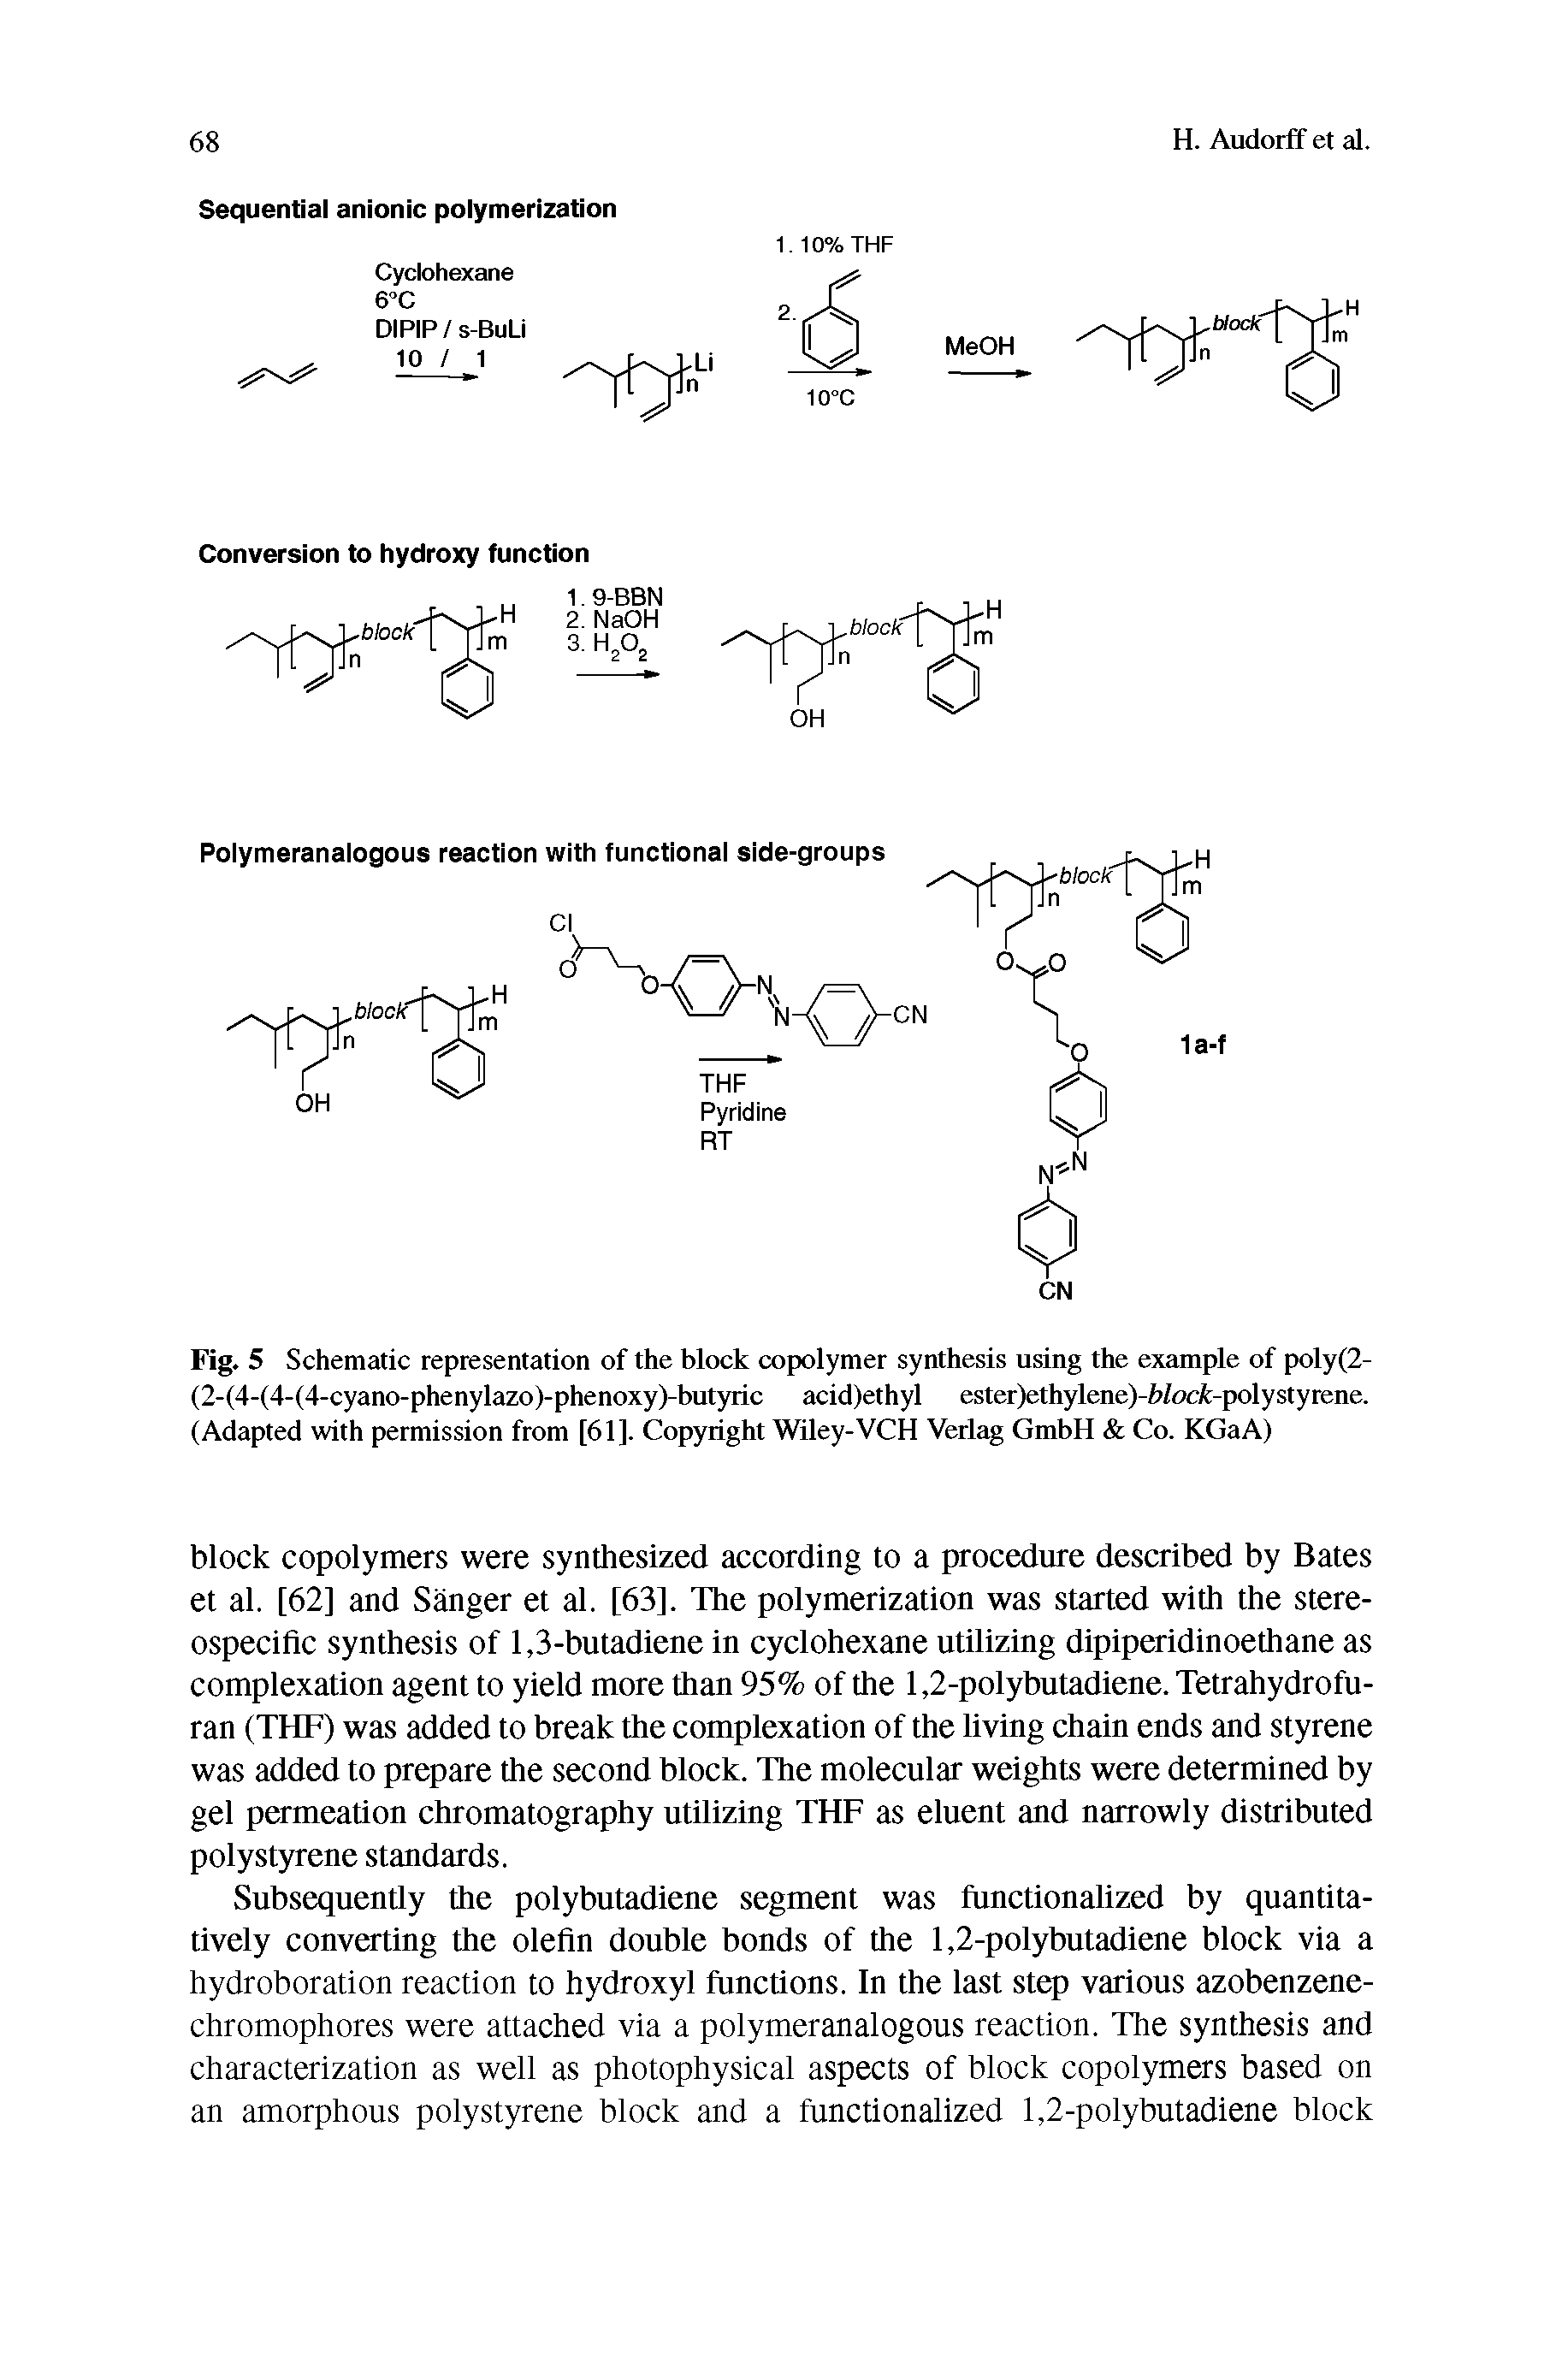 Fig. 5 Schematic representation of the block copolymer synthesis using the example of poly(2-(2-(4-(4-(4-cyano-phenylazo)-phenoxy)-butyric acid)ethyl es ter)et h y I cnc)-block- pol y st y re n e.